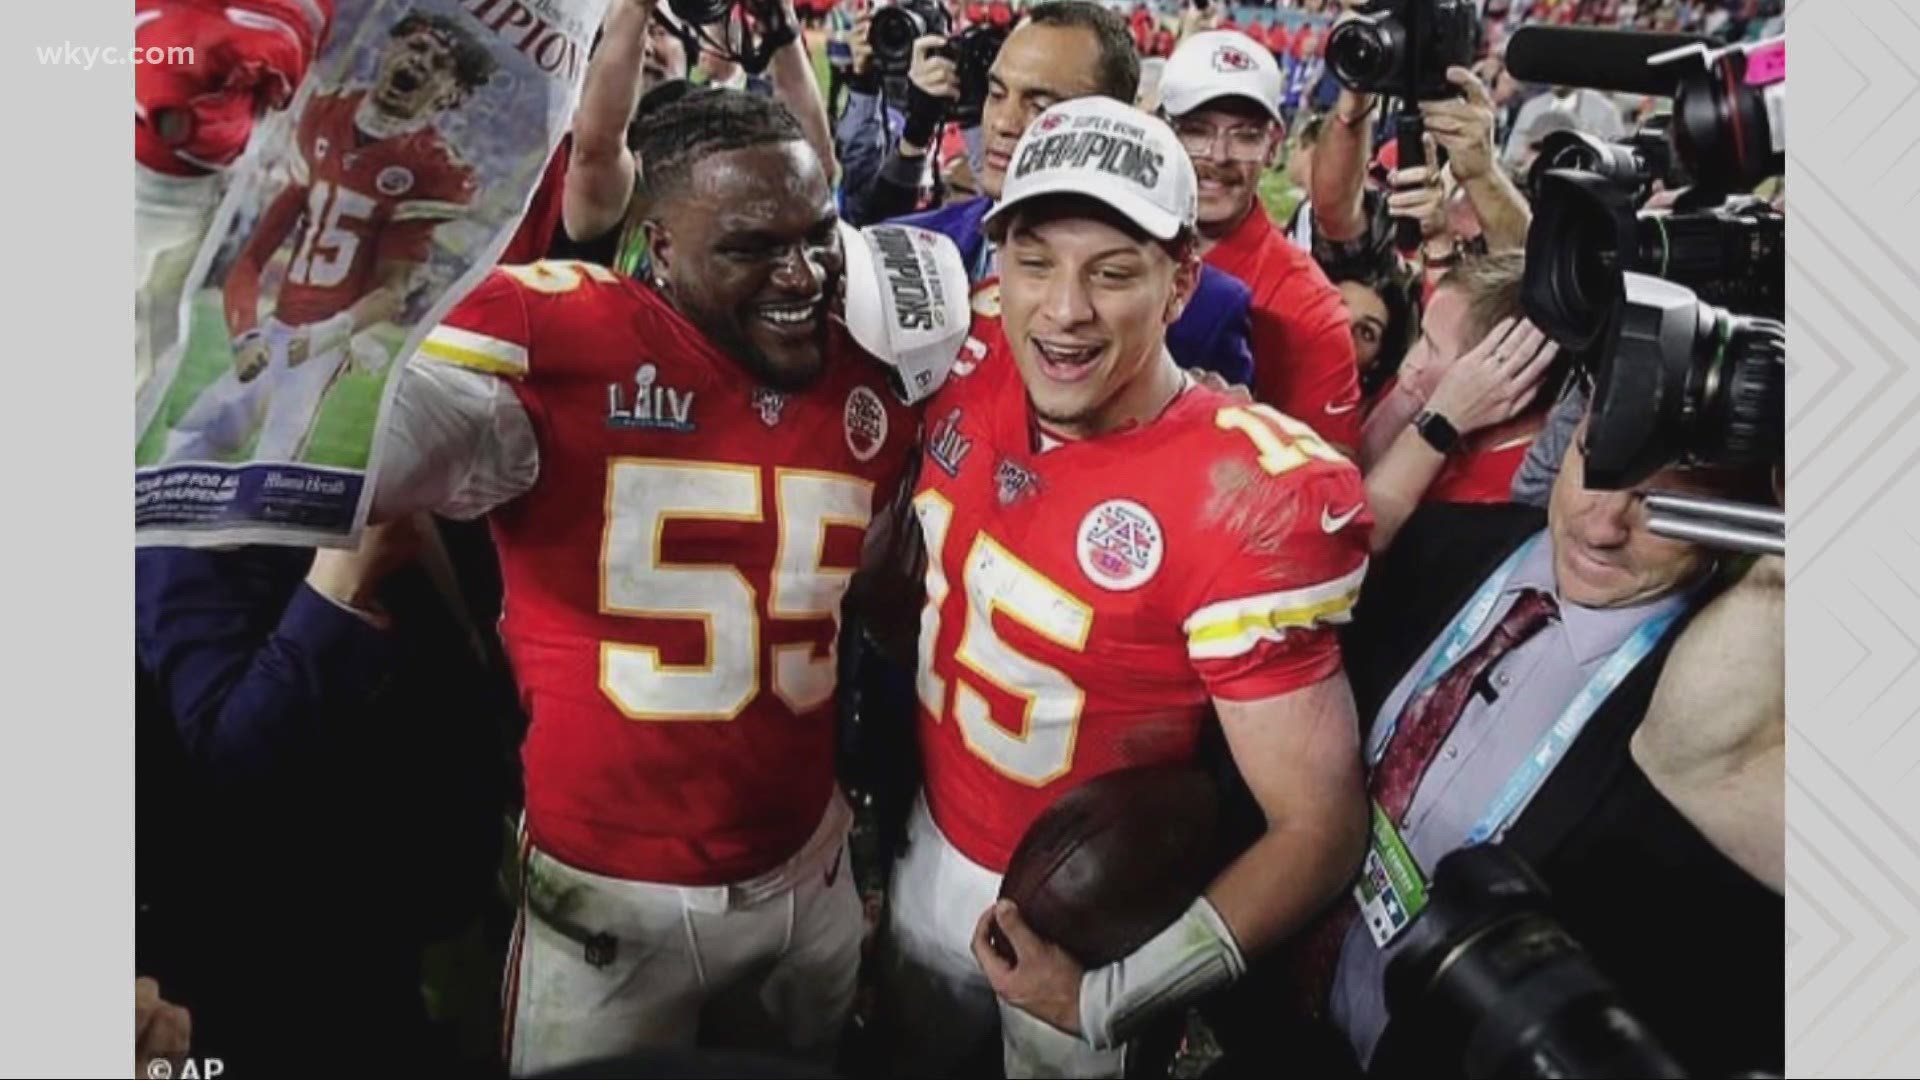 What would you do if one of your closest friends played for the opposing team? That is the dilemma for one Northeast Ohio man as Frank Clark plays for the Chiefs.